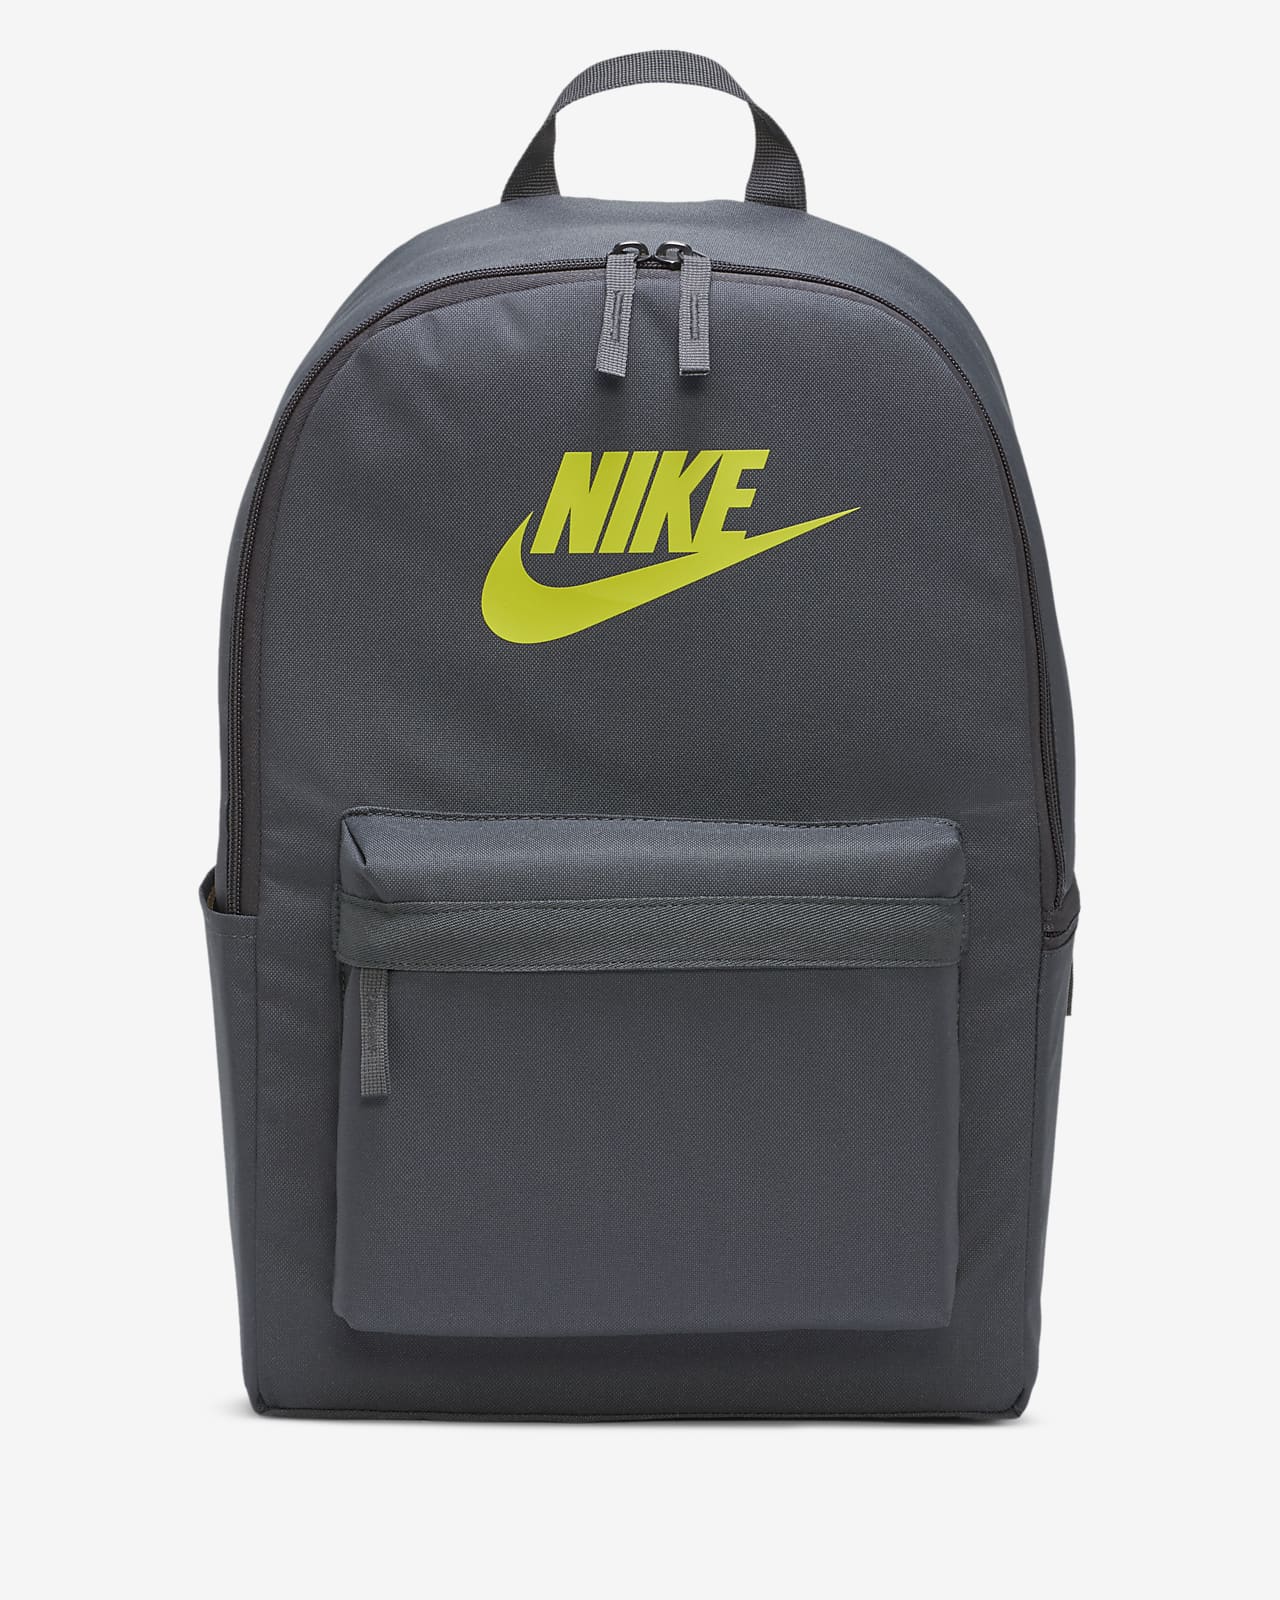 nike athdpt backpack